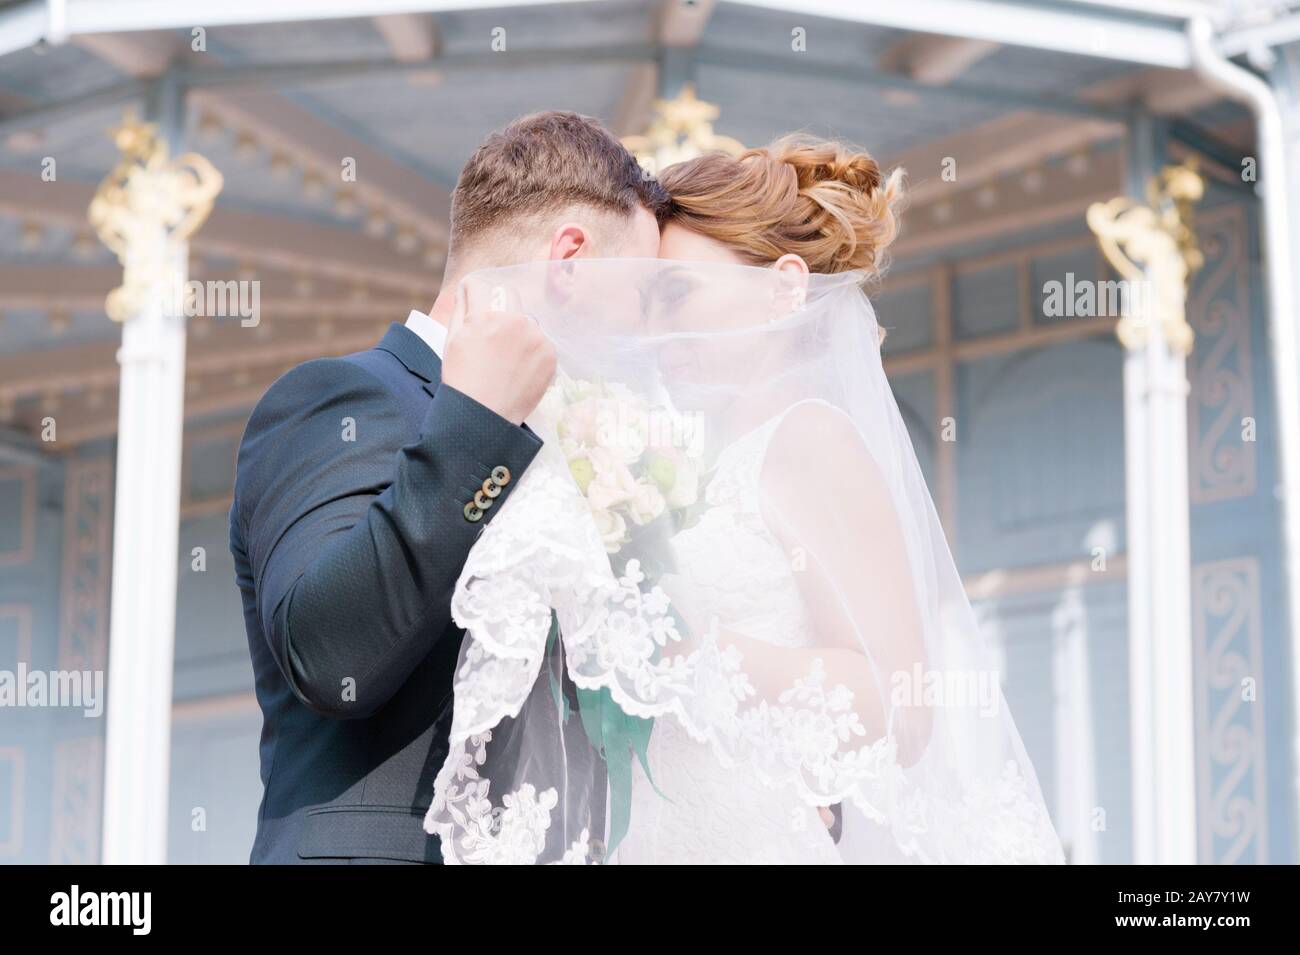 Portrait of a lovely couple of newlyweds, hiding behind a veil, stands embracing against the background of the vintage building Stock Photo